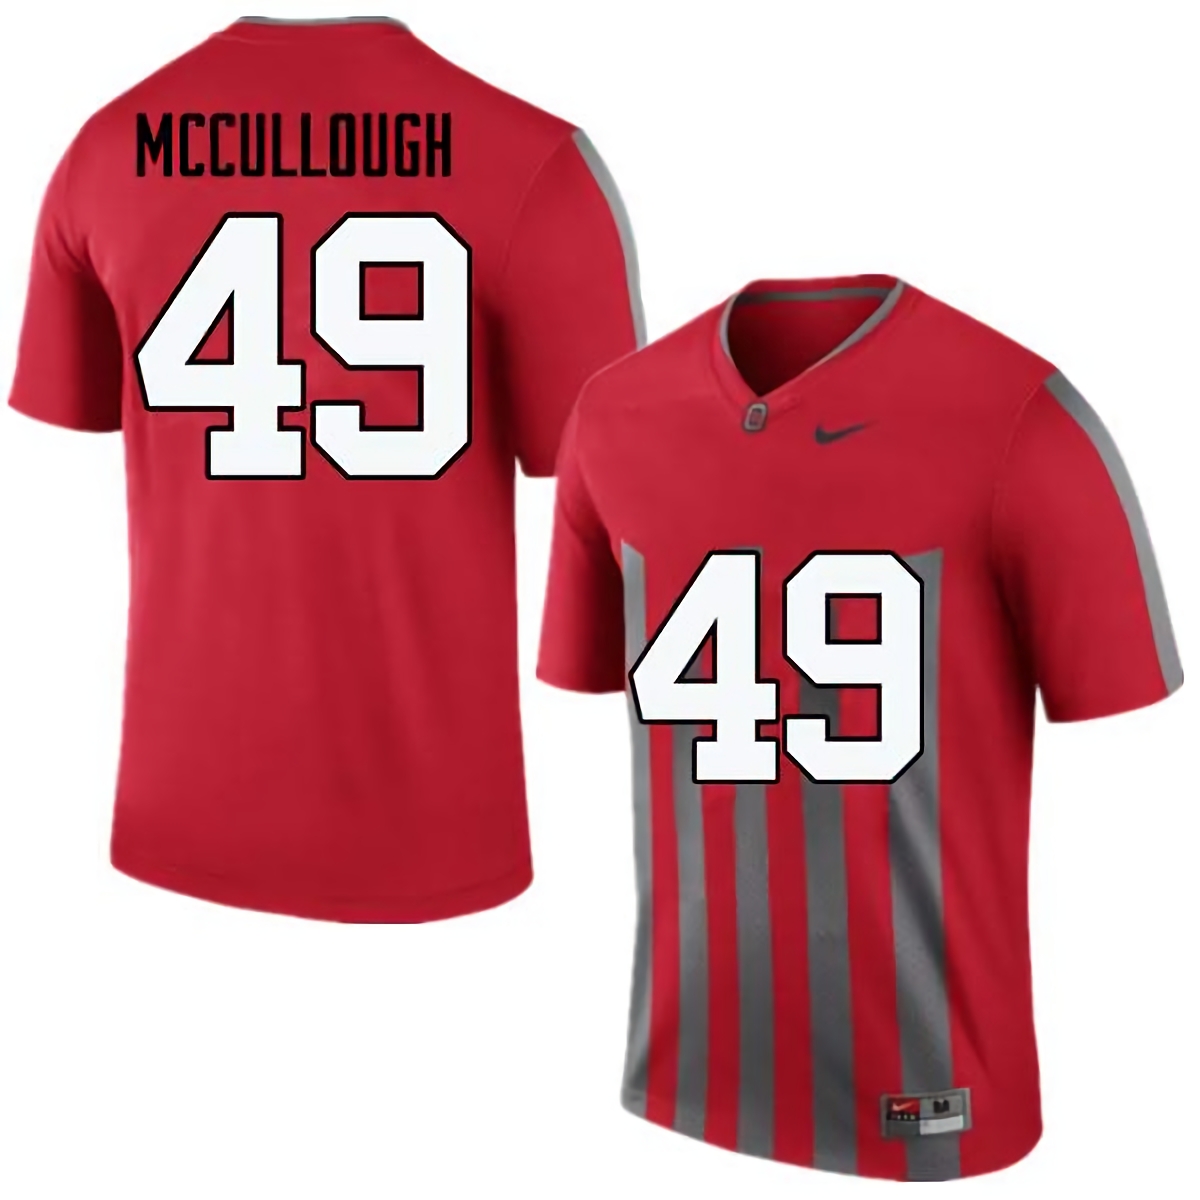 Liam McCullough Ohio State Buckeyes Men's NCAA #49 Nike Throwback Red College Stitched Football Jersey GKZ5556HR